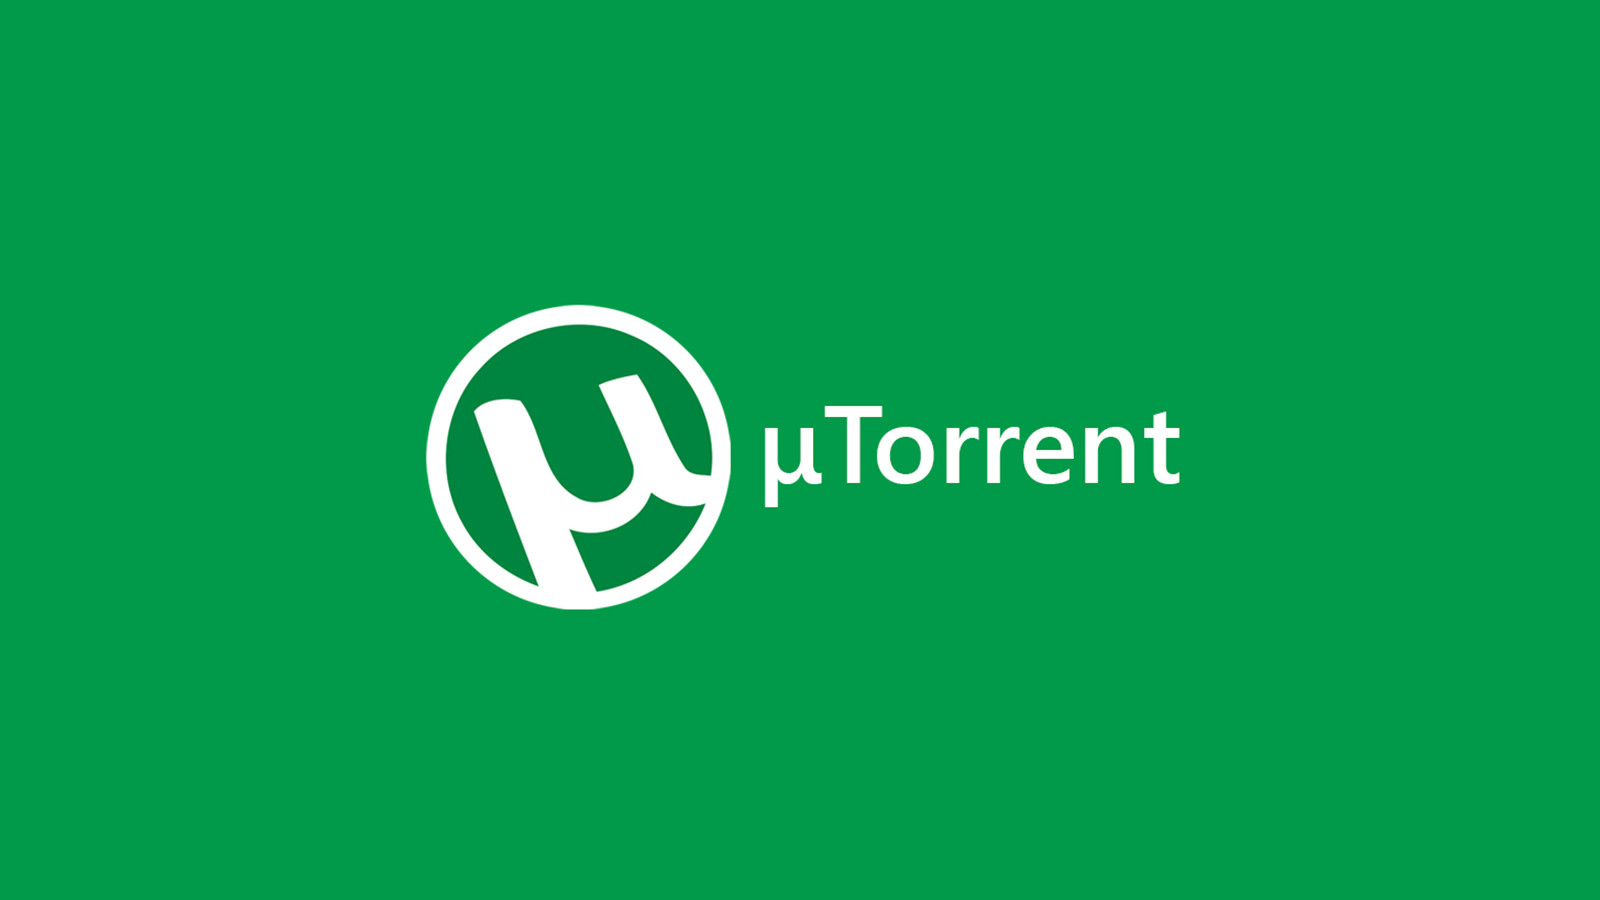 How To Make Torrents Download Faster